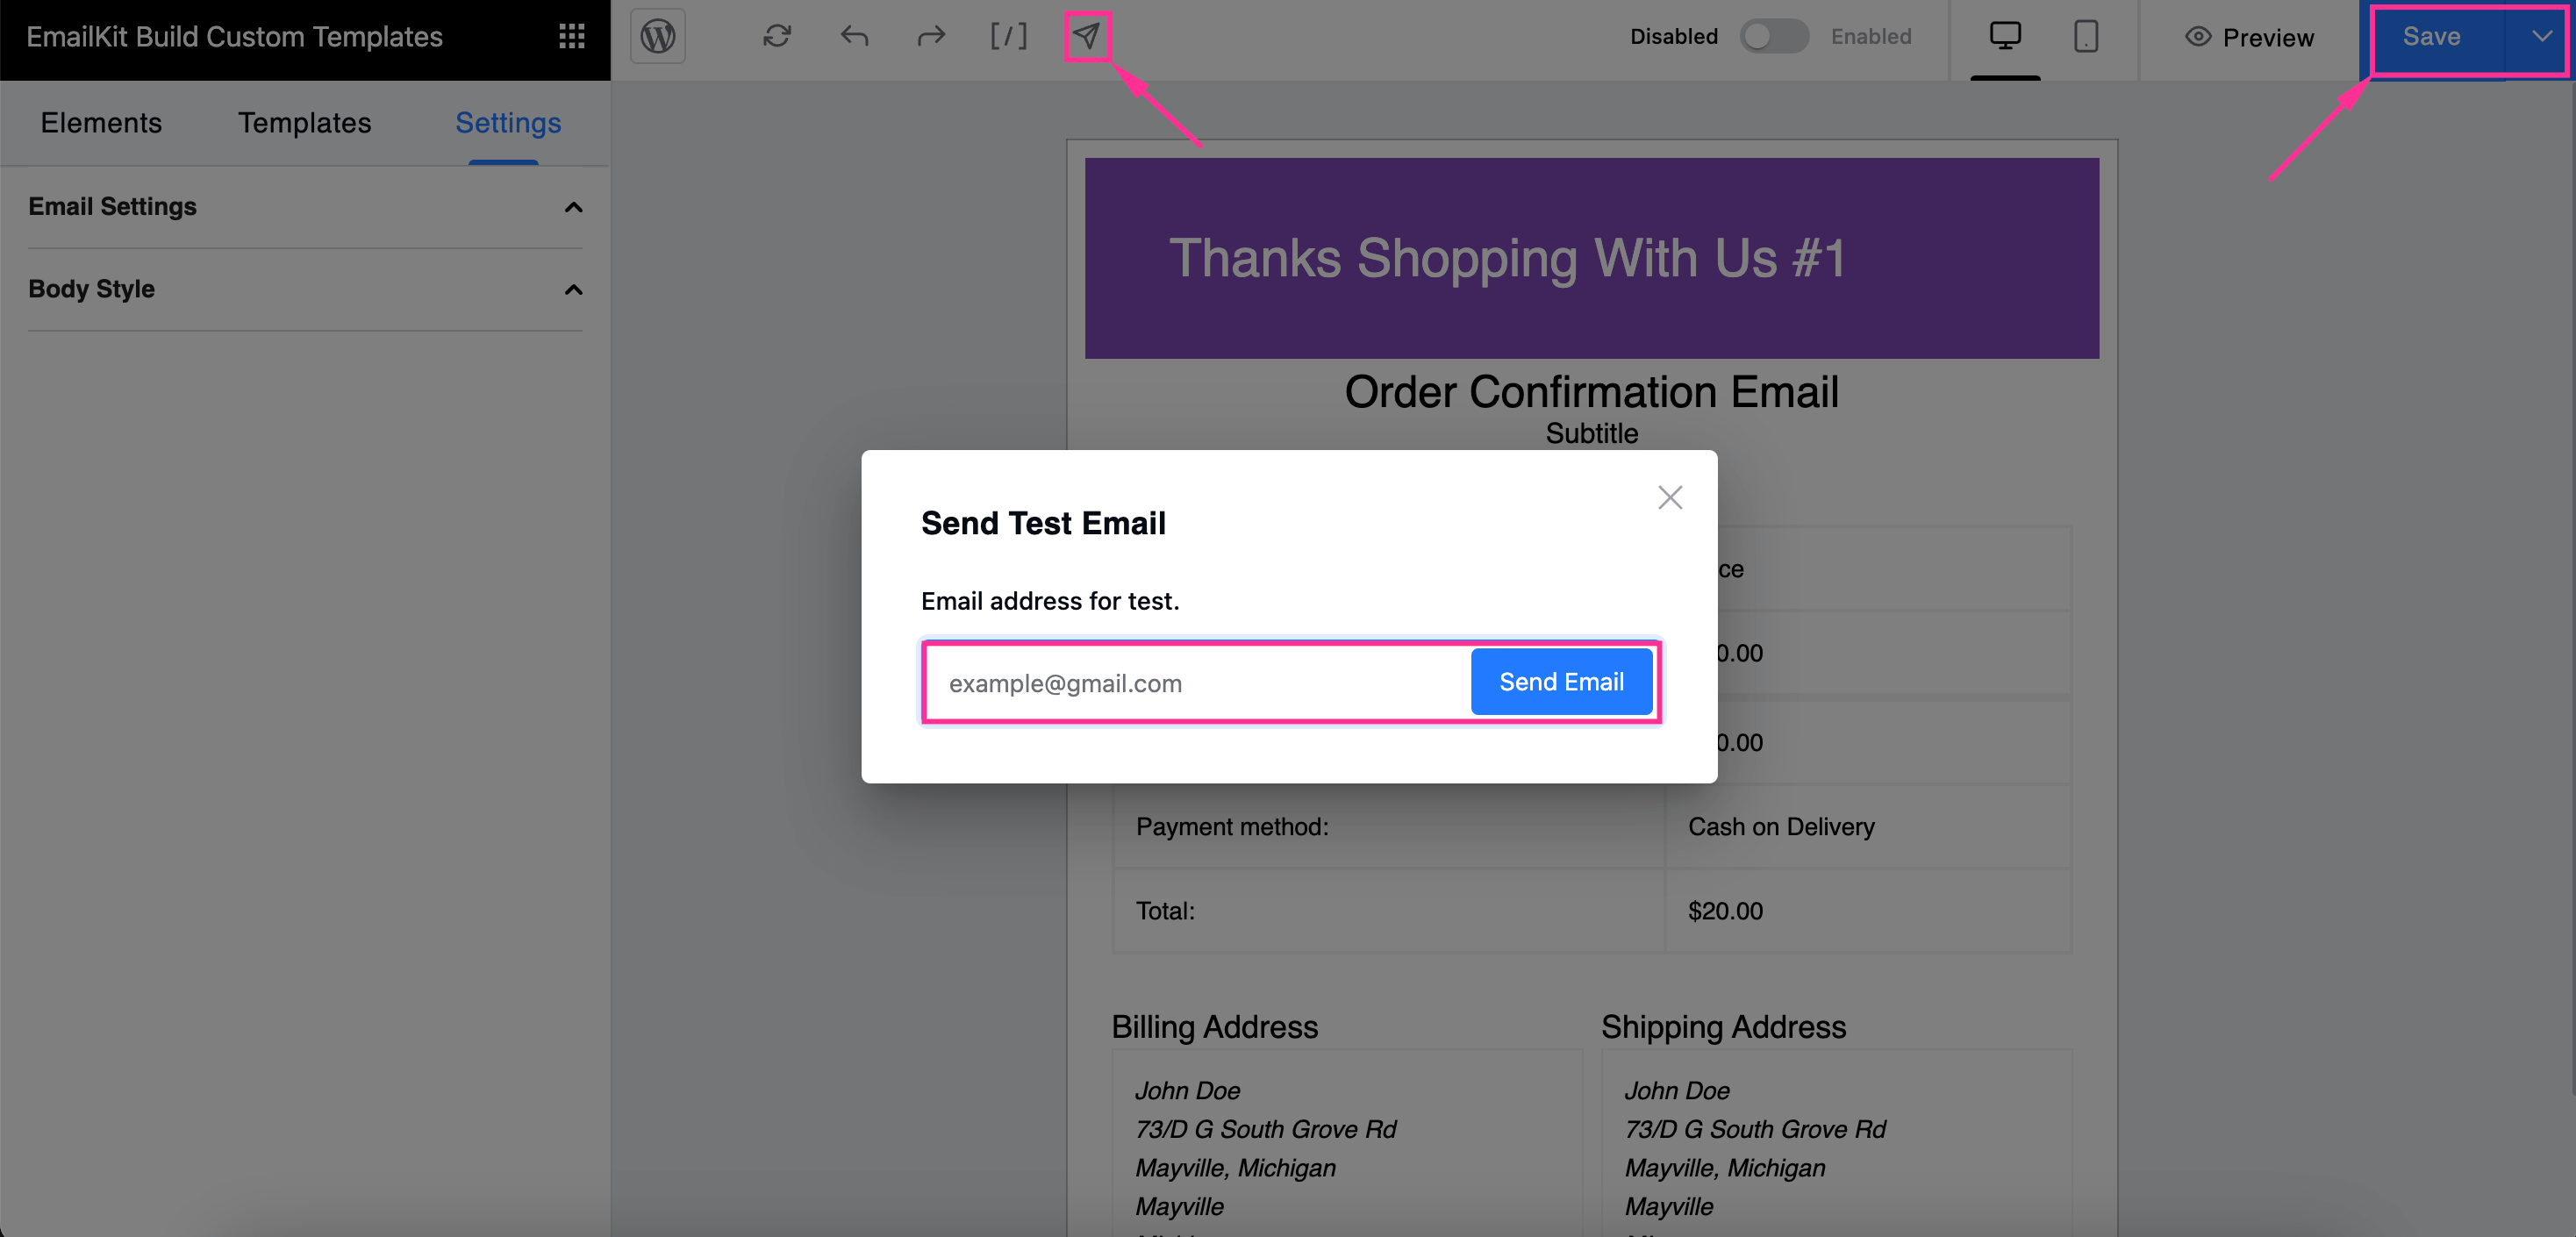 Test order confirmation email with EmailKit